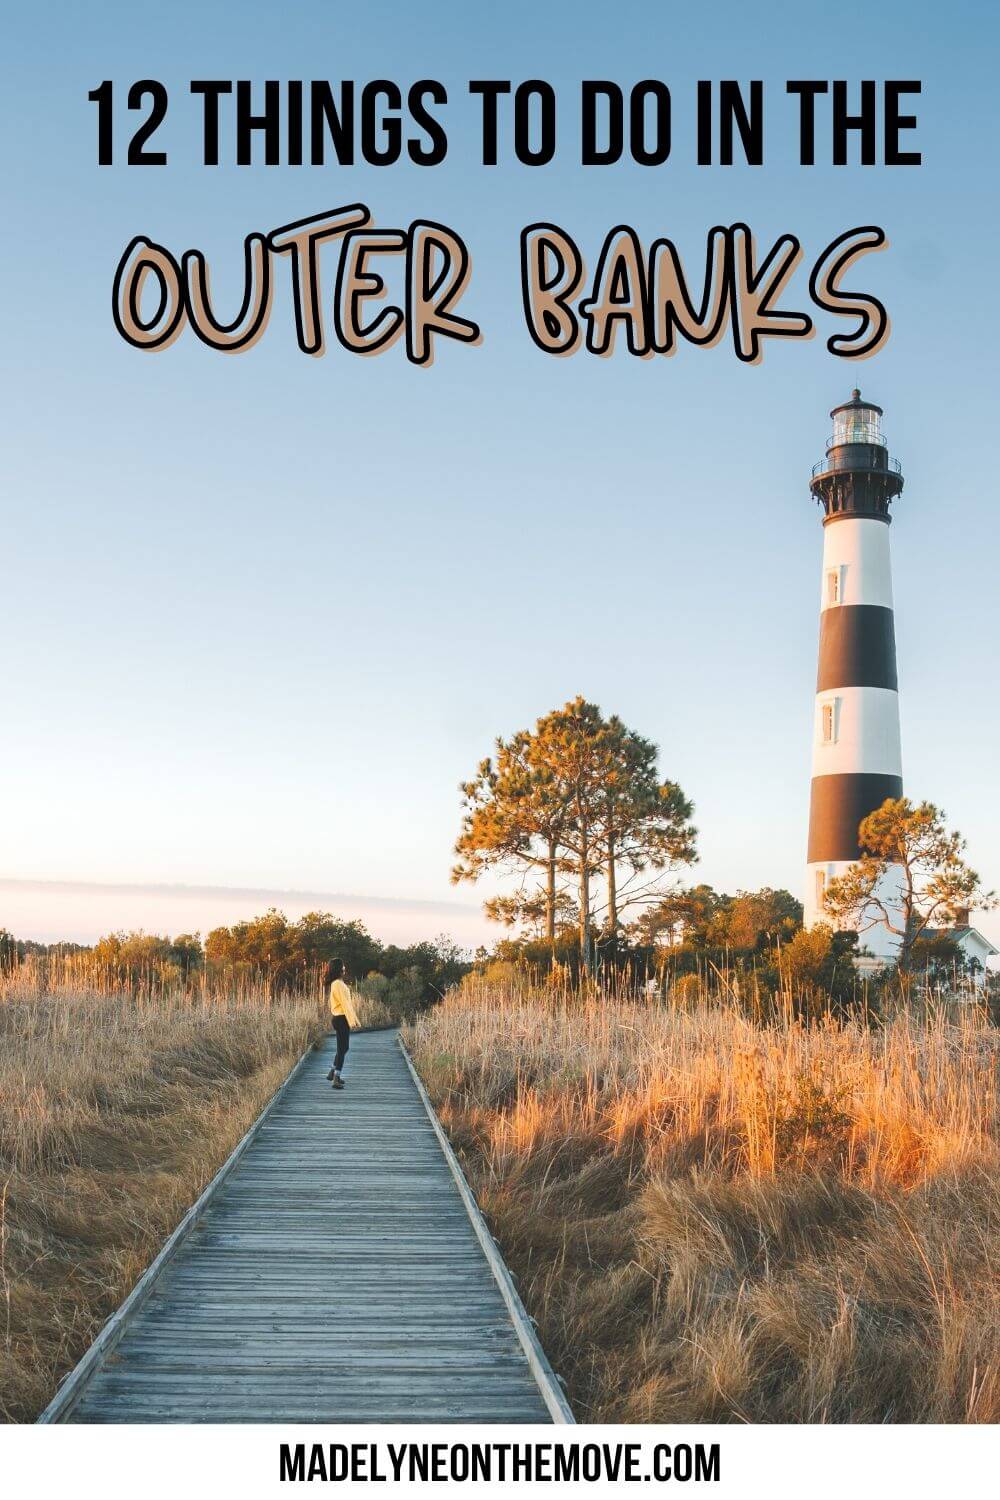 Outer Banks recommendations